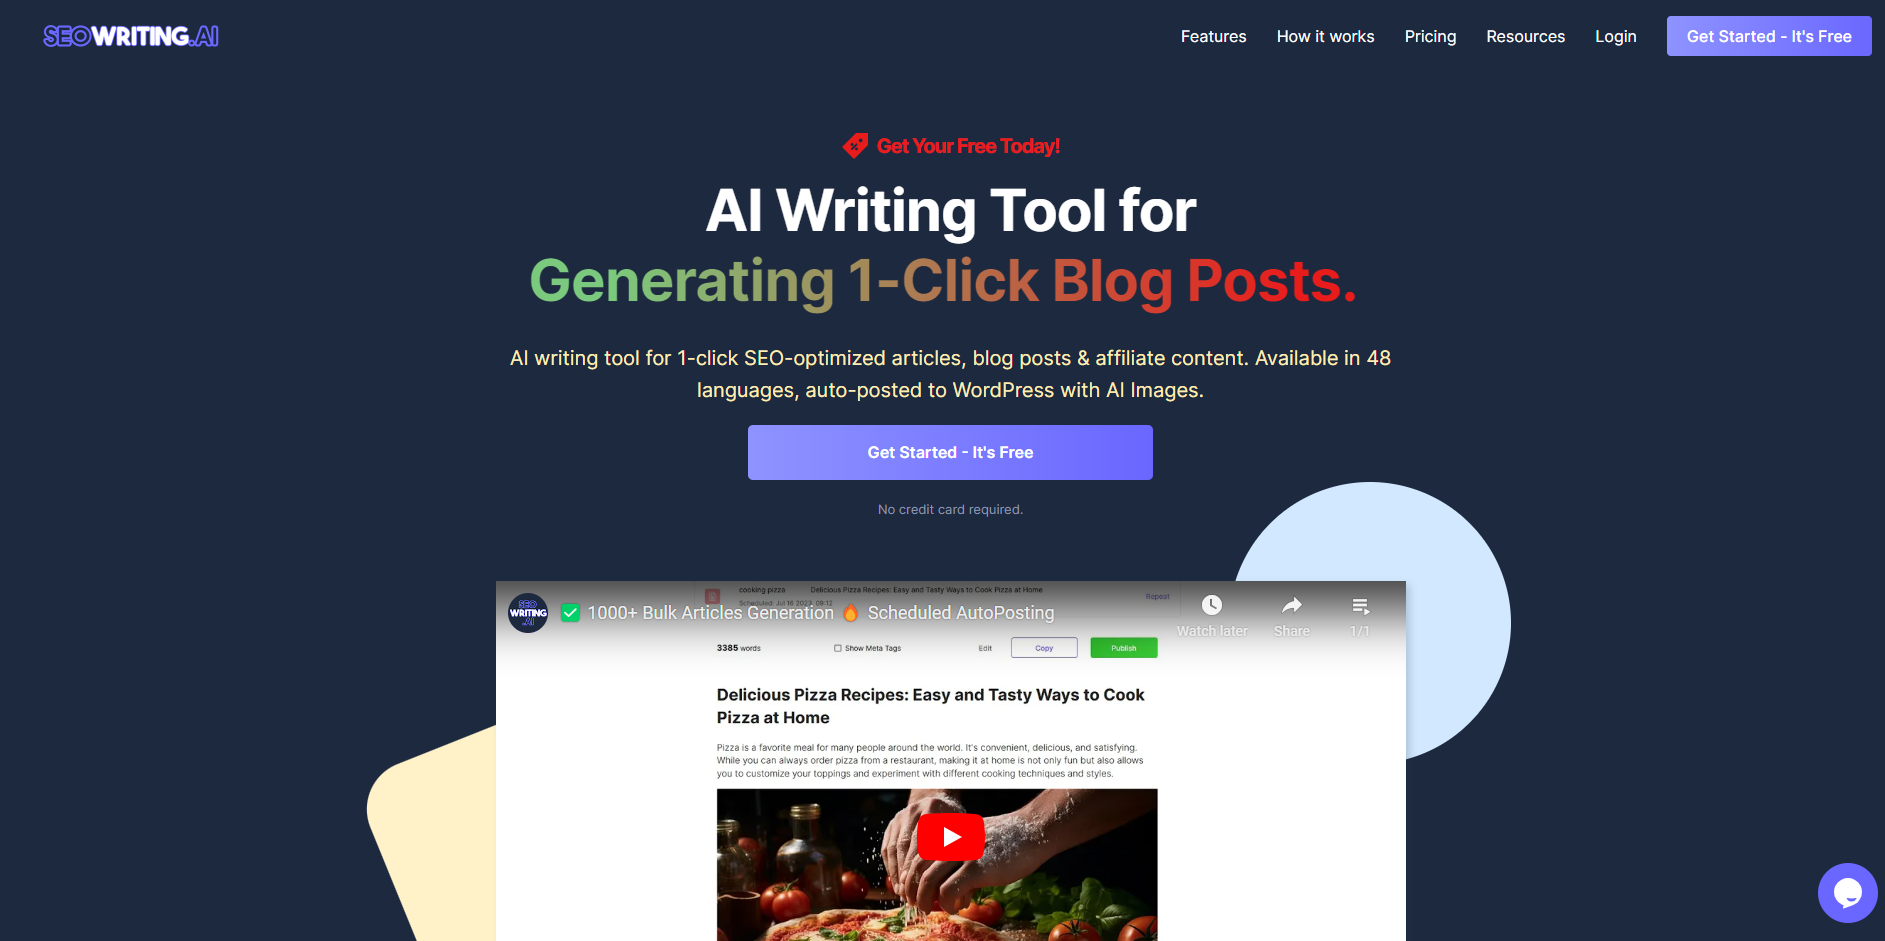 Blog Better And Faster Using This AI Tool (SEOwriting.AI Review)